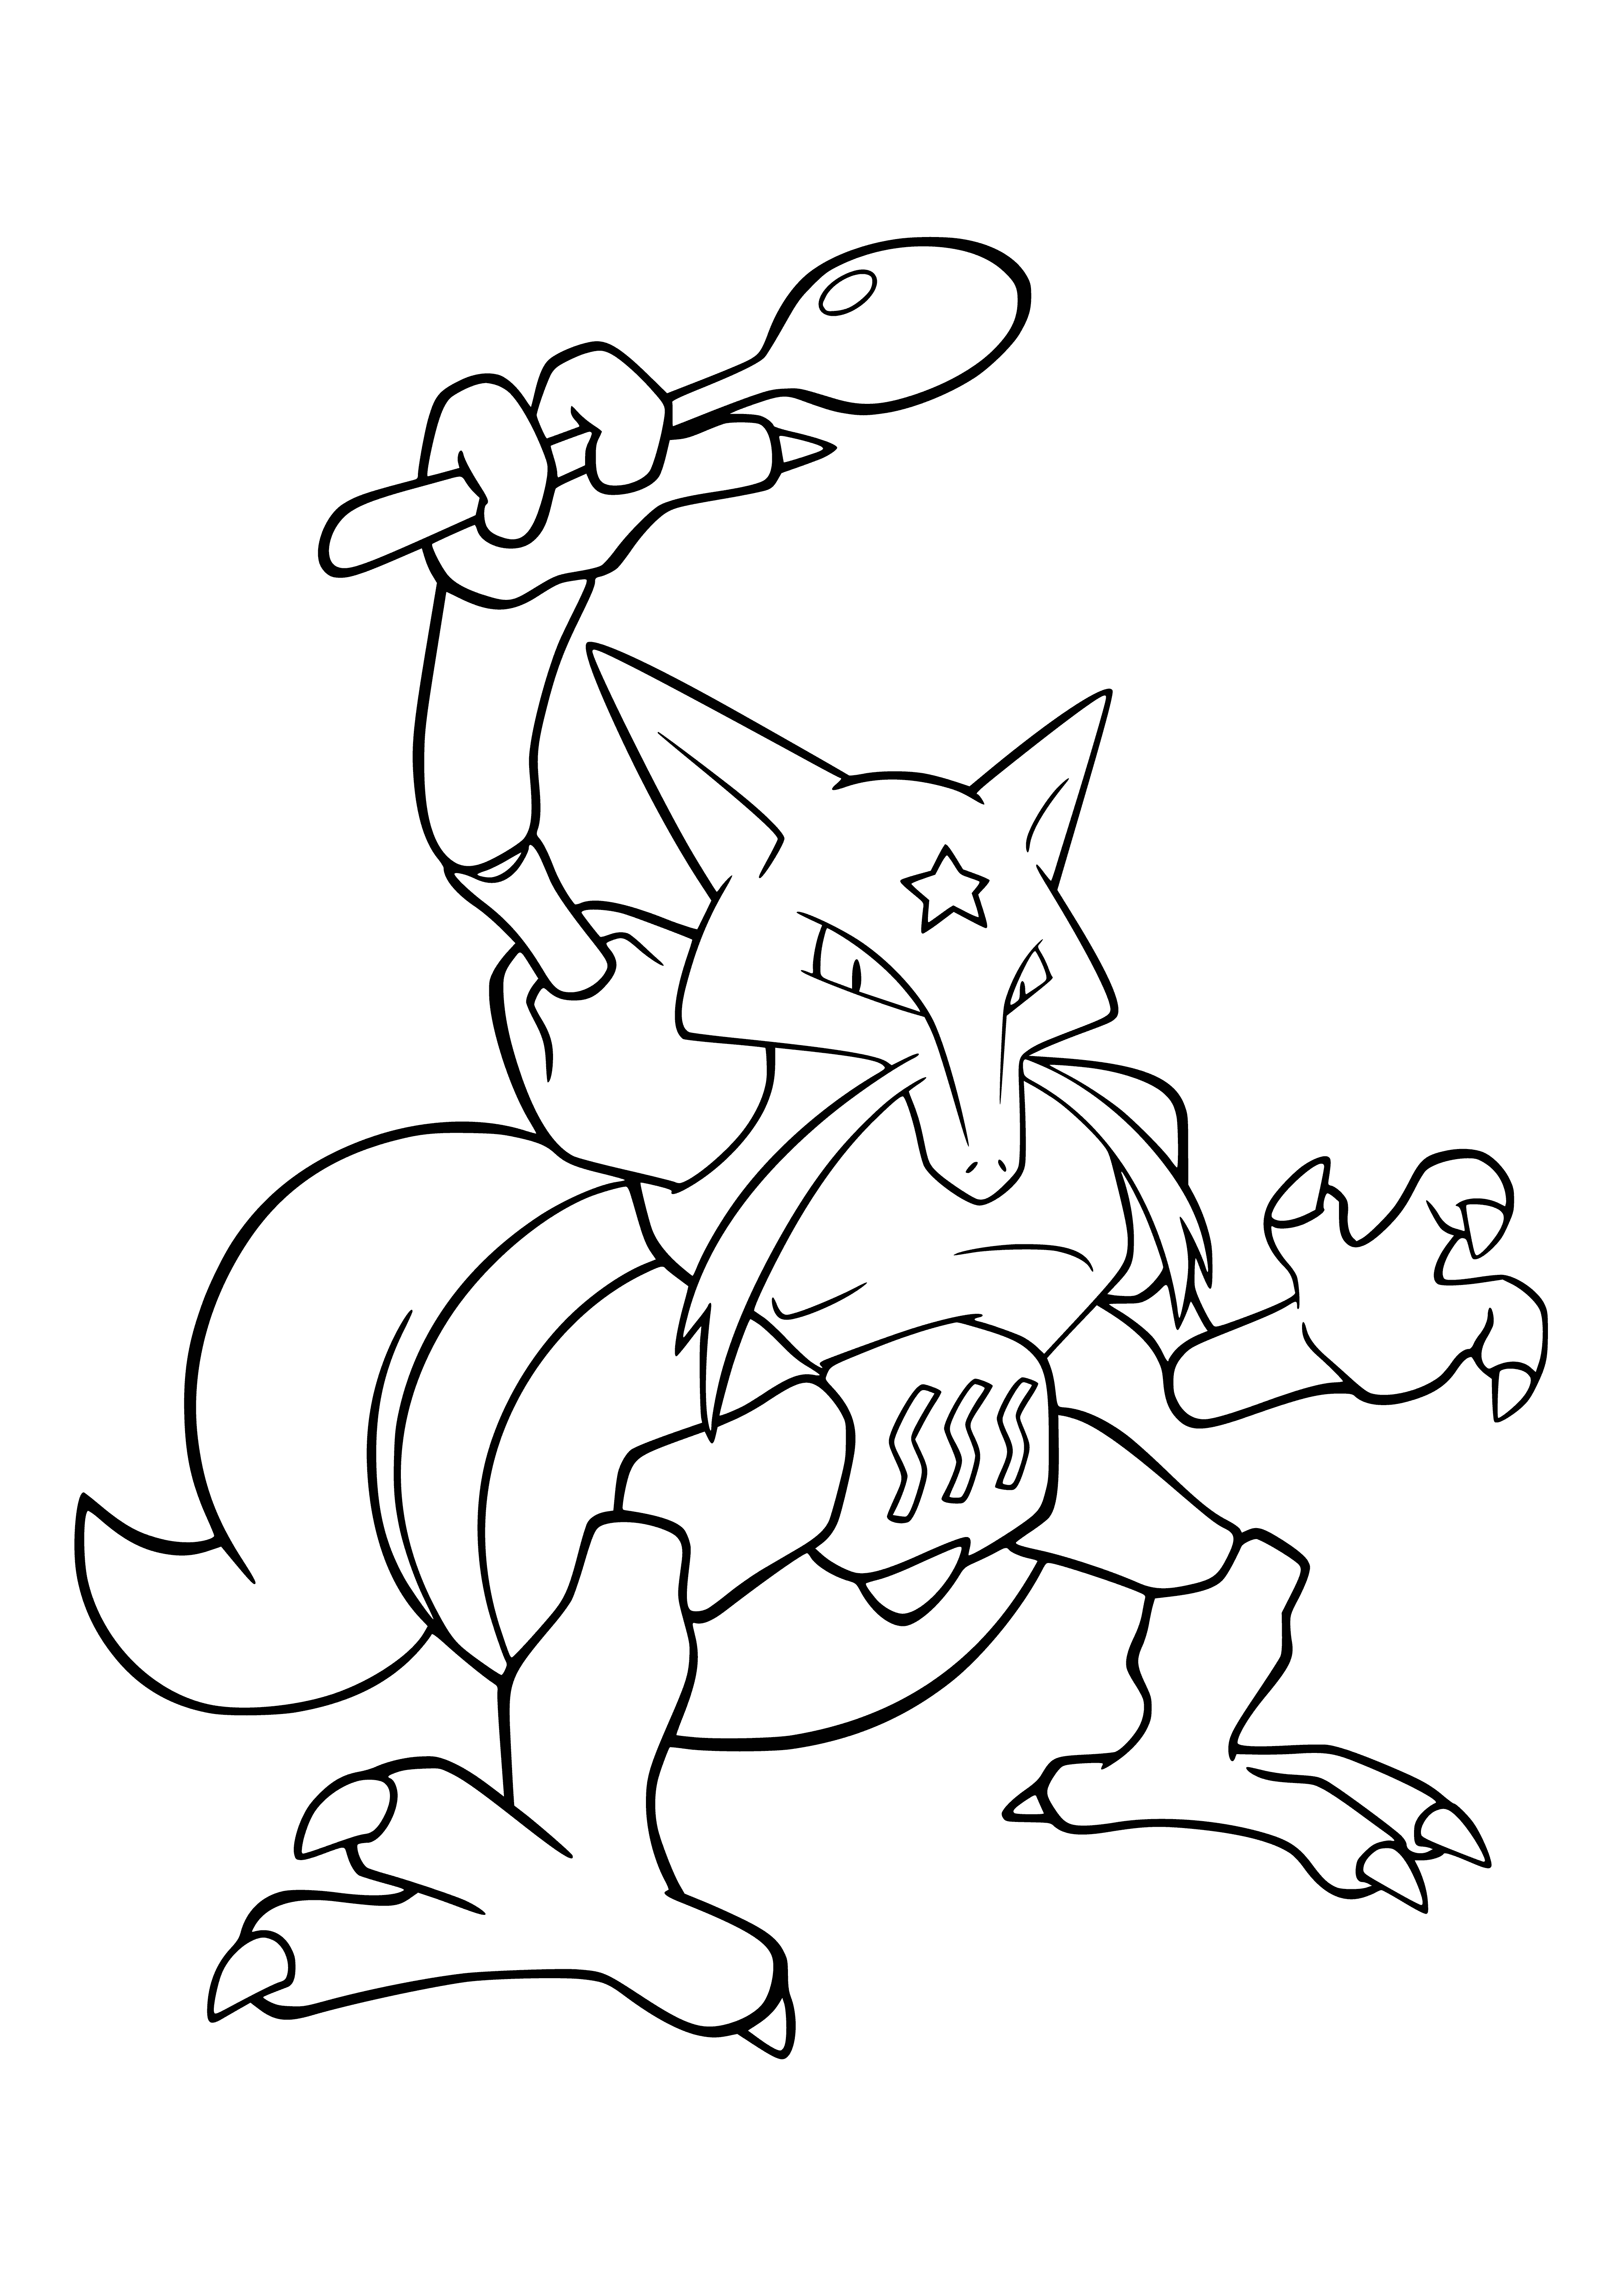 coloring page: Kadabra is a Psychic-type Pokémon with yellow and brown body, long neck and limbs, short mustache and long hair. On its forehead is an orange pattern.